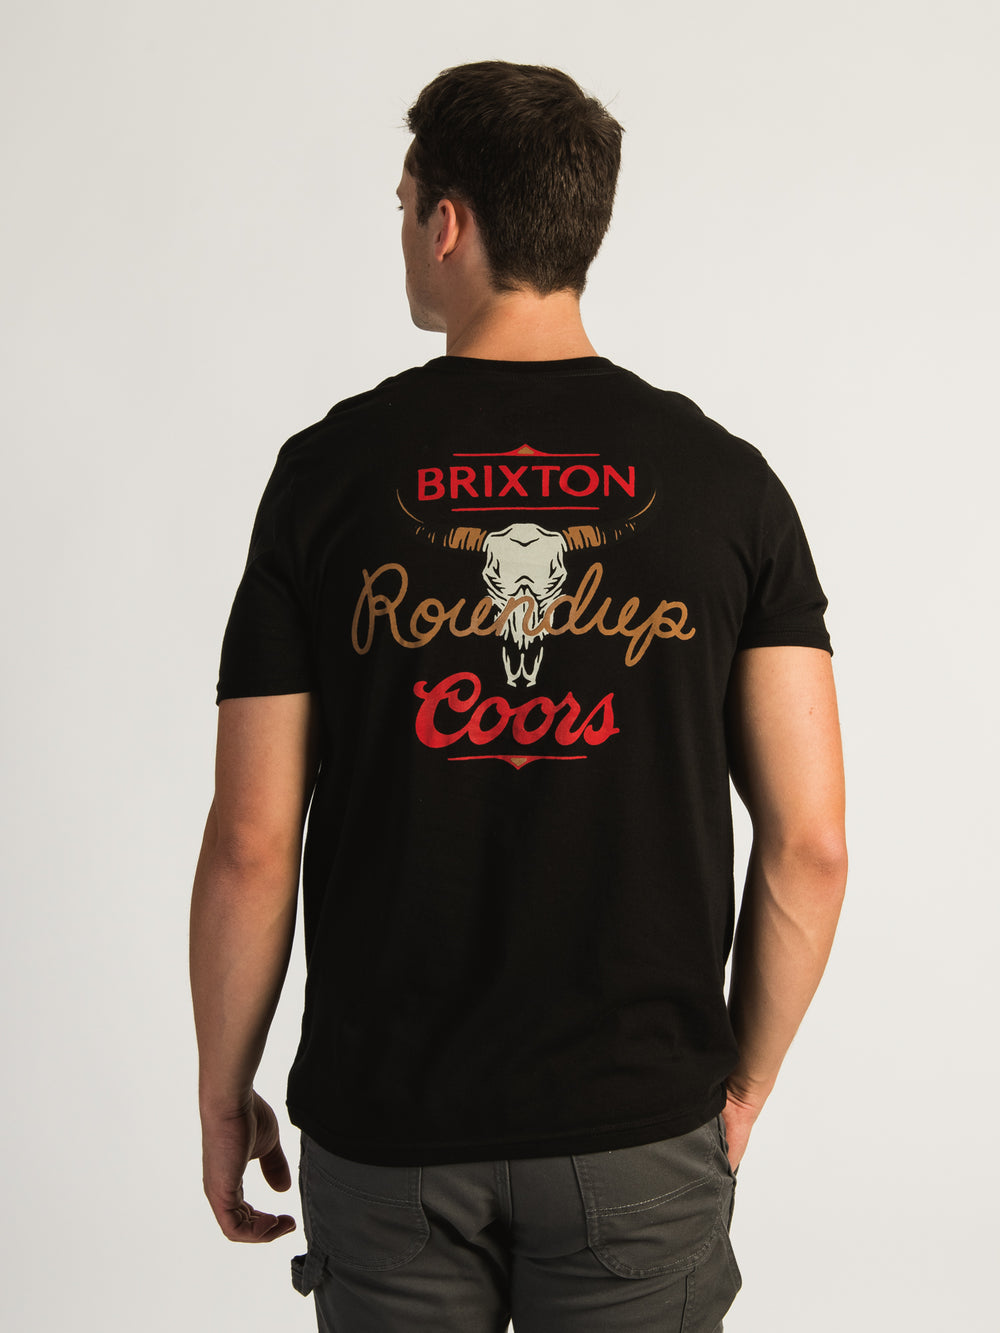 T-SHIRT BRIXTON COORS ROUND UP